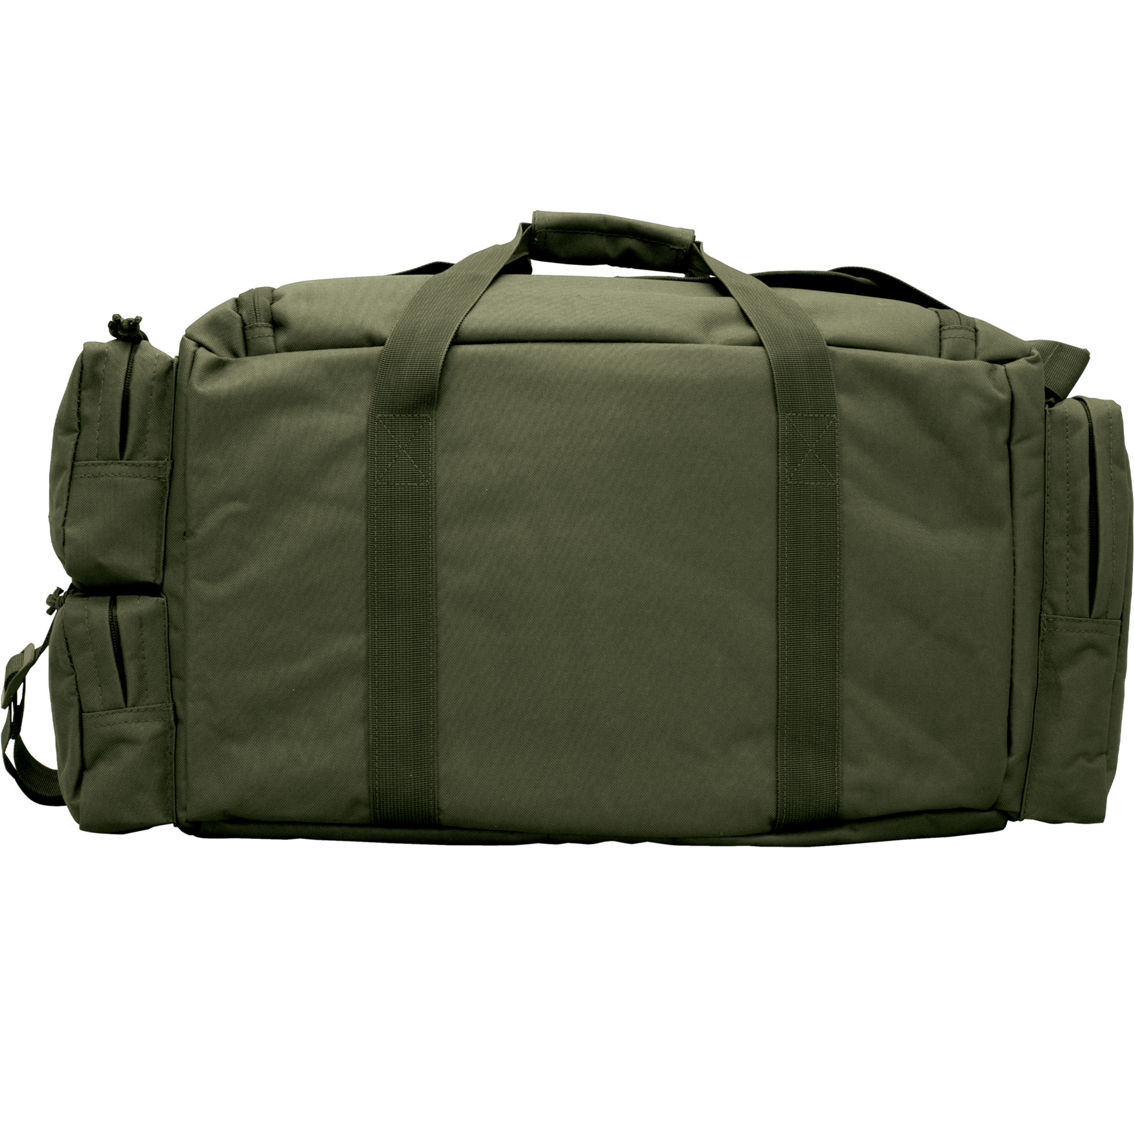 Red Rock Outdoor Gear Operations Duffel Bag - Image 2 of 6